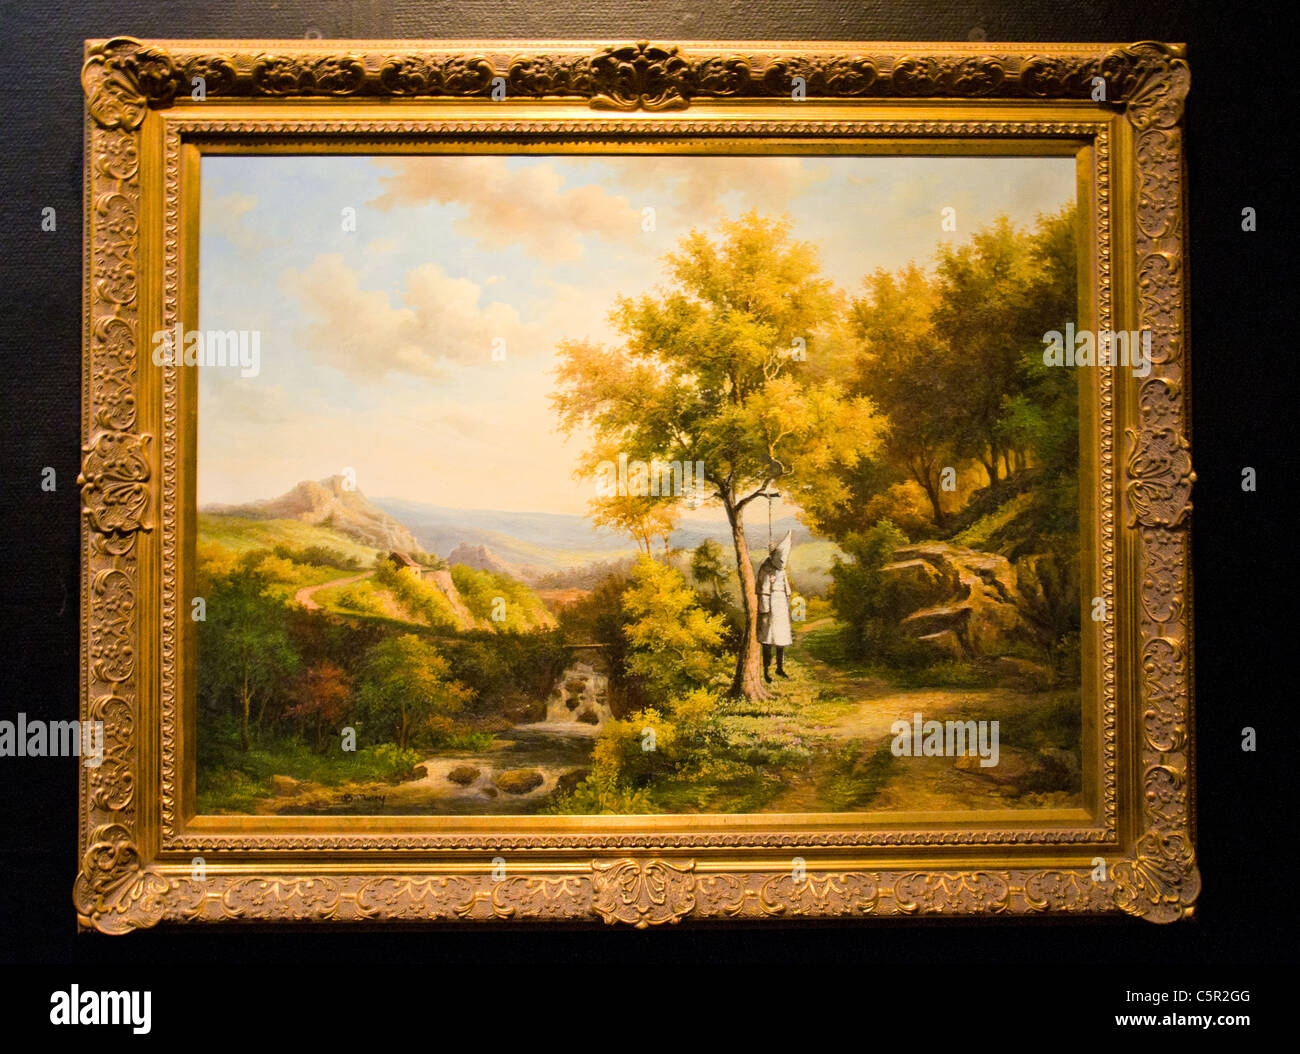 Banksy picture of lunched Ku Klux Klan member hanging from tree in classic rural painting Stock Photo